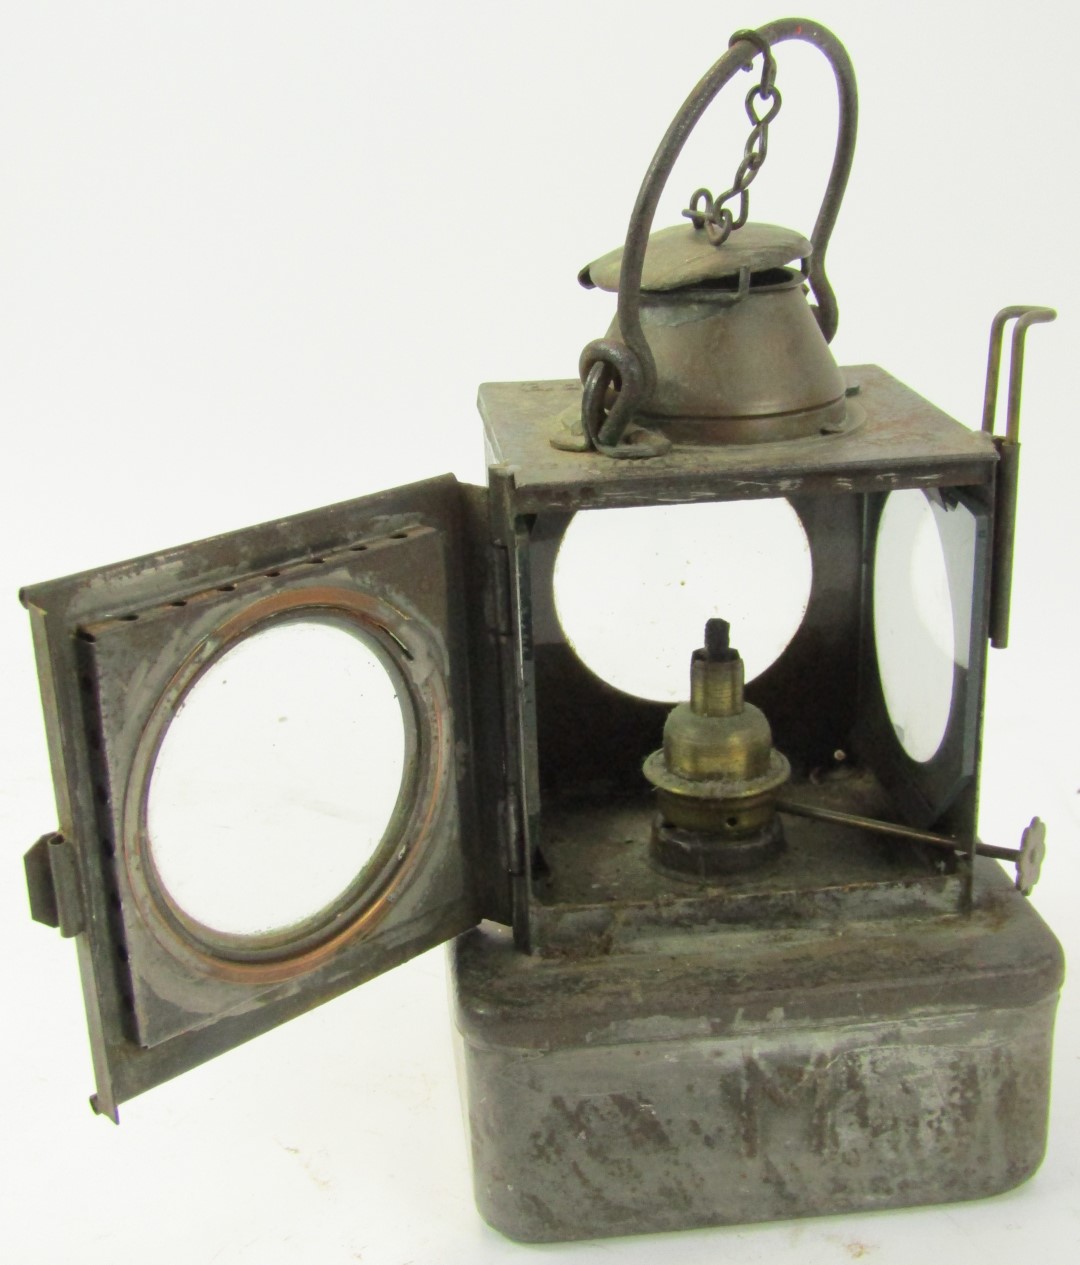 A Lamp Manufacturing and Railway Services Ltd London railway lantern, BR(E), registration number 711 - Image 2 of 4